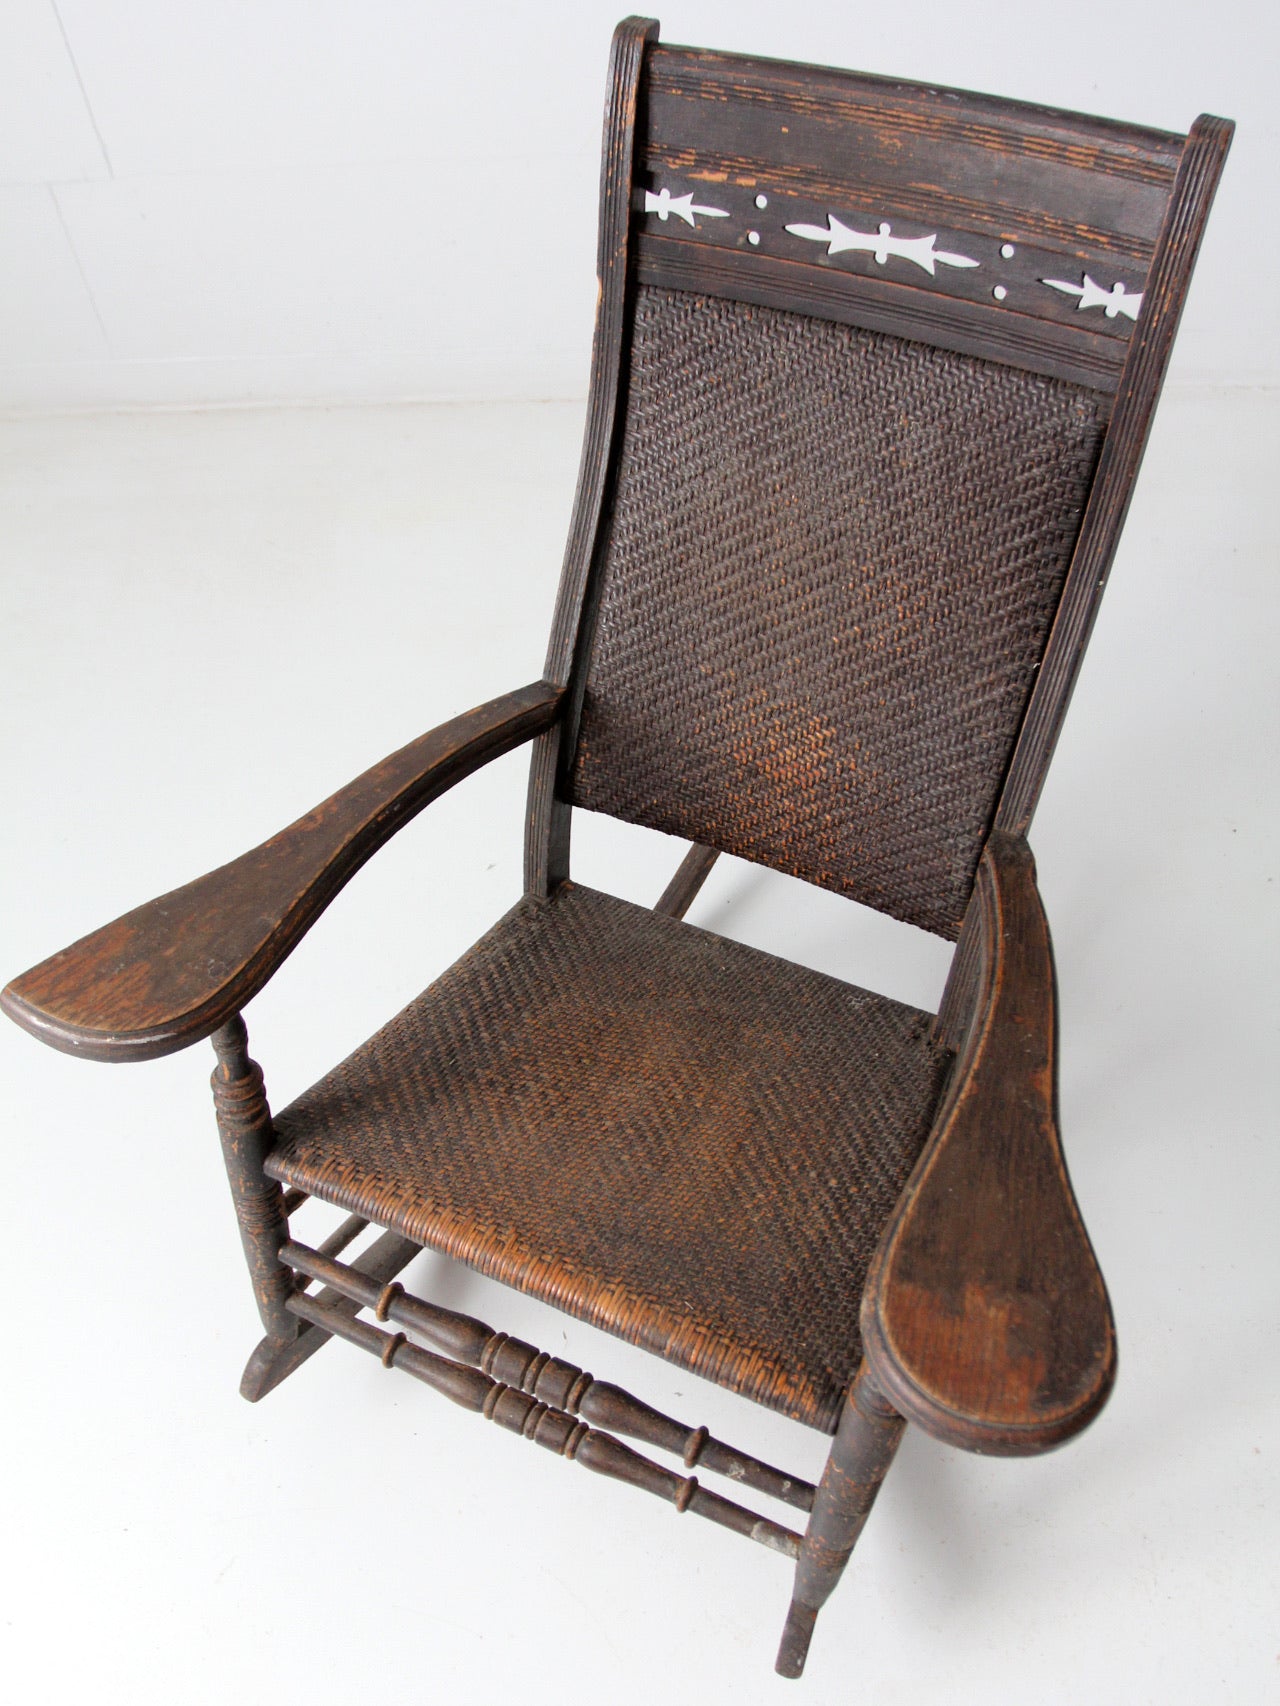 antique American rustic rocking chair